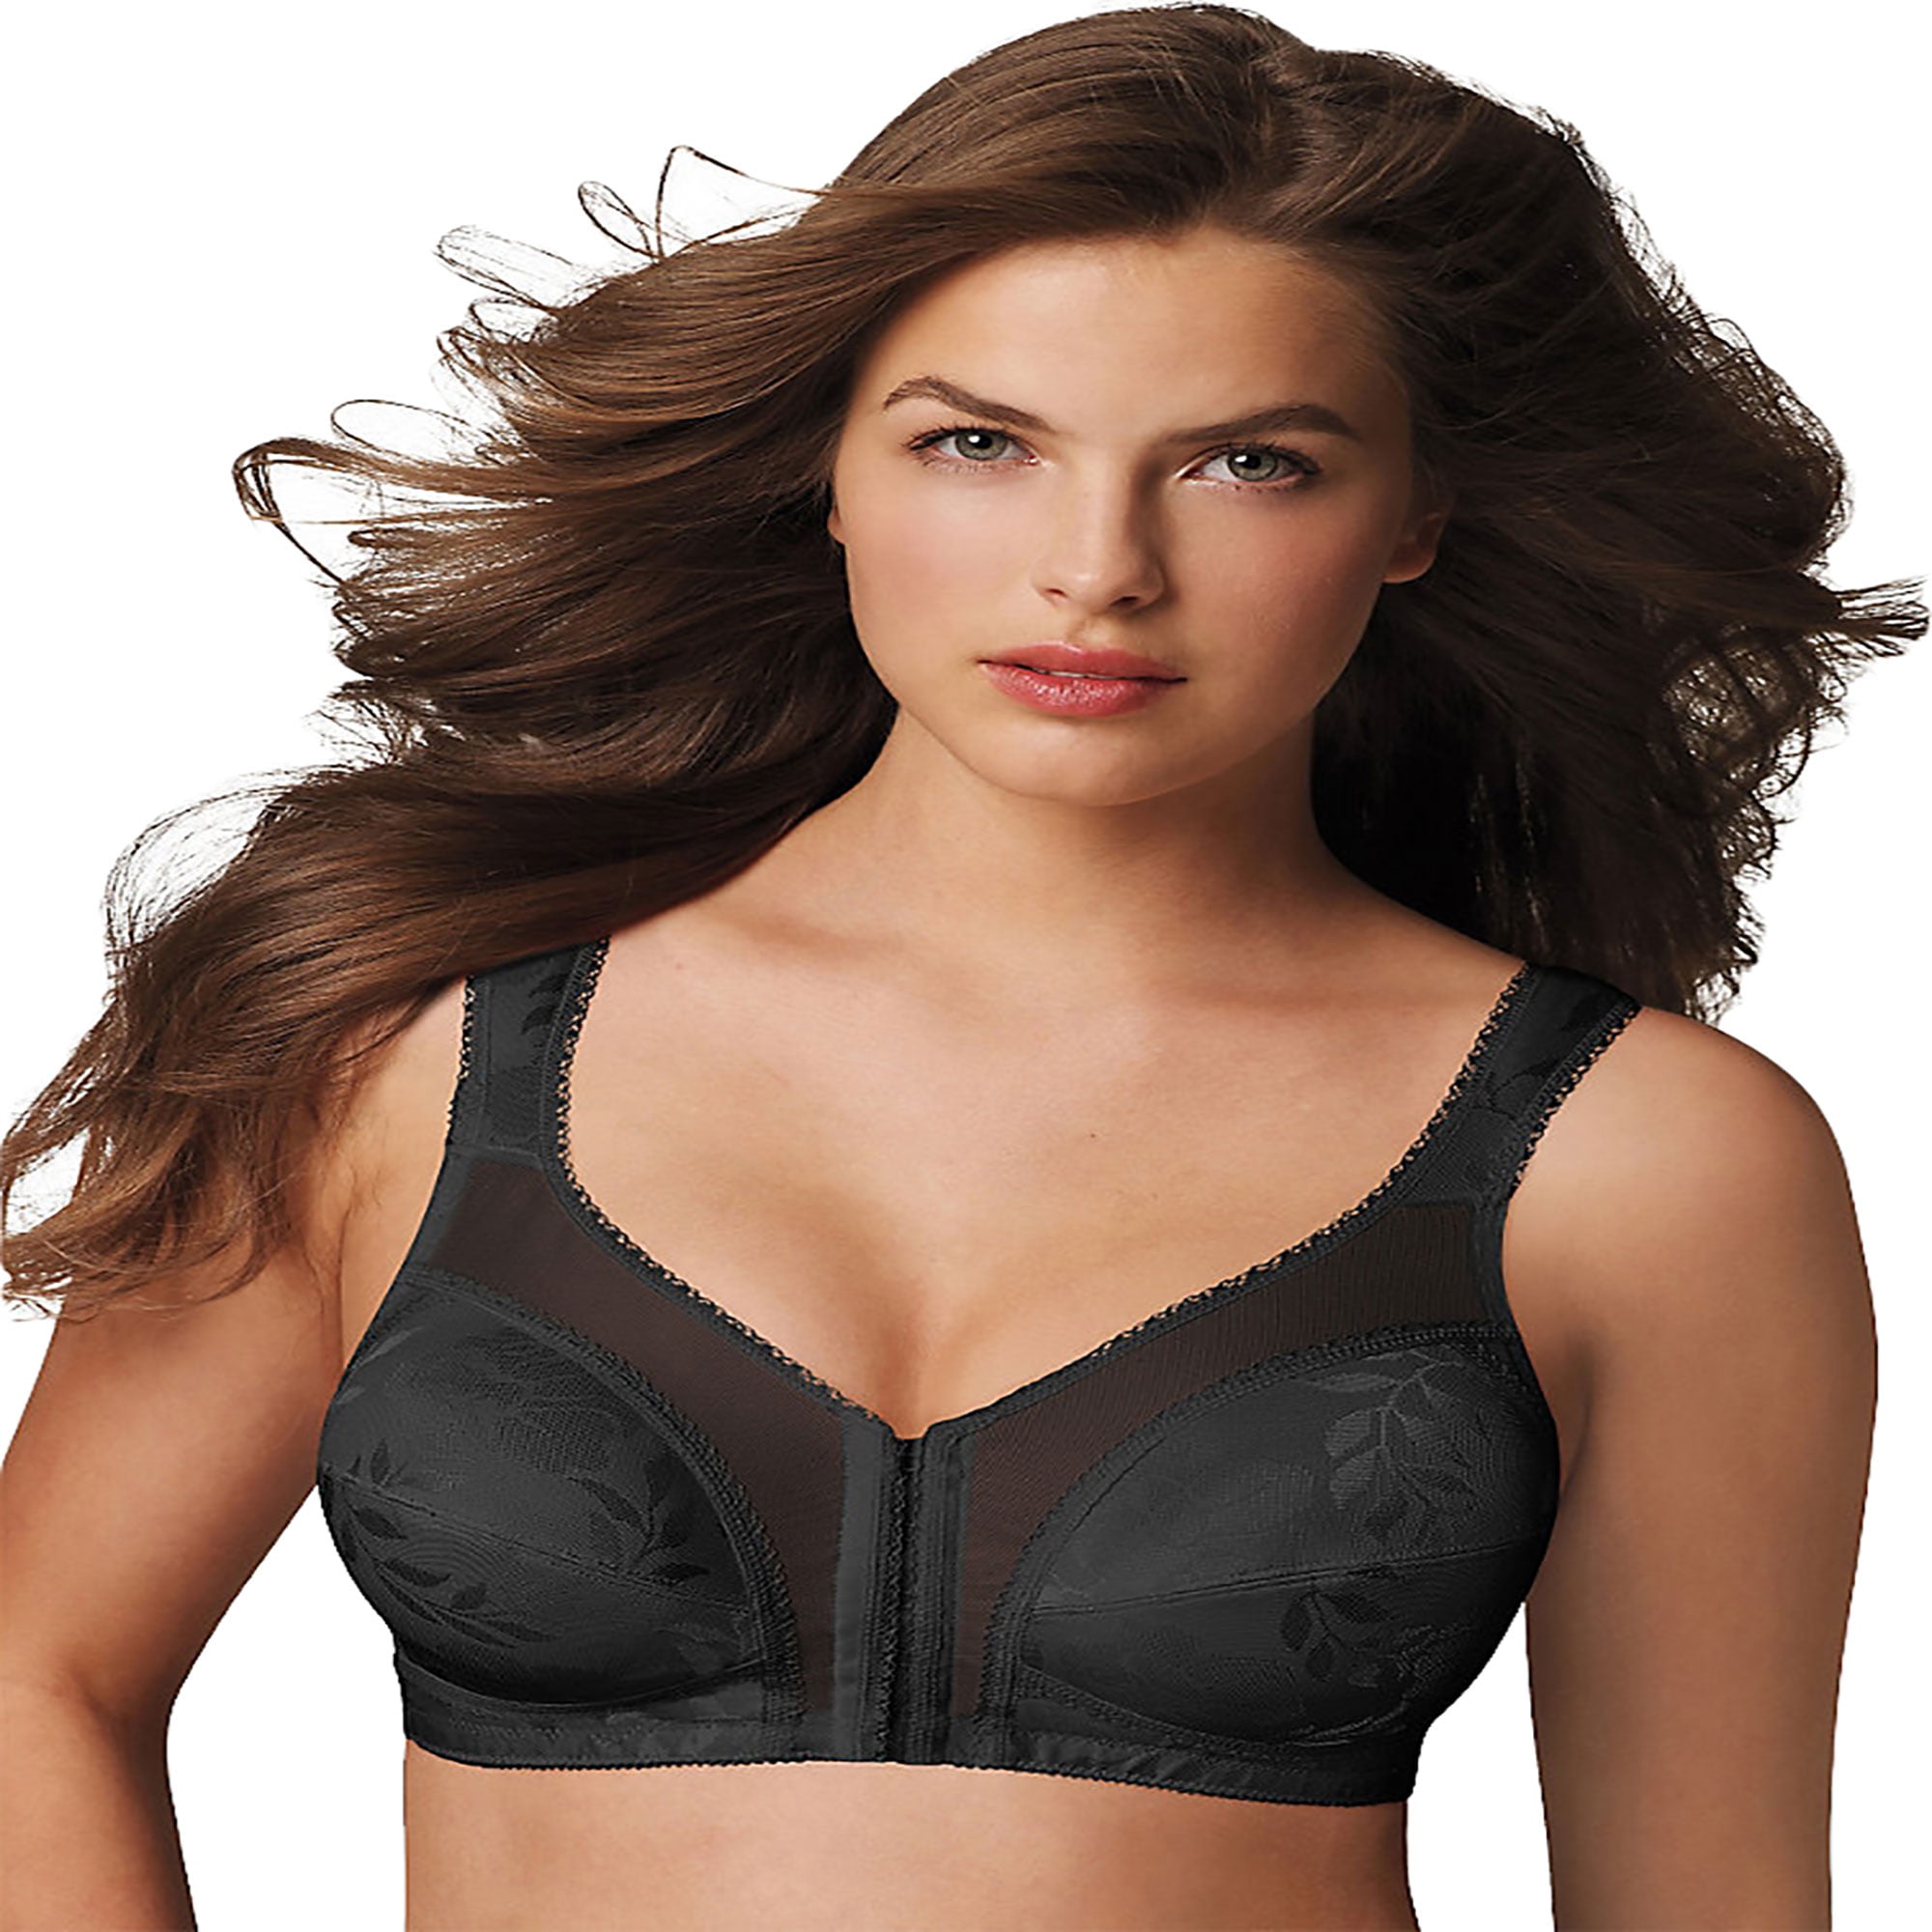 Playtex Women's 18 Hour Front-Close Wirefree Bra w/Flex Back US4695 -  ShopStyle